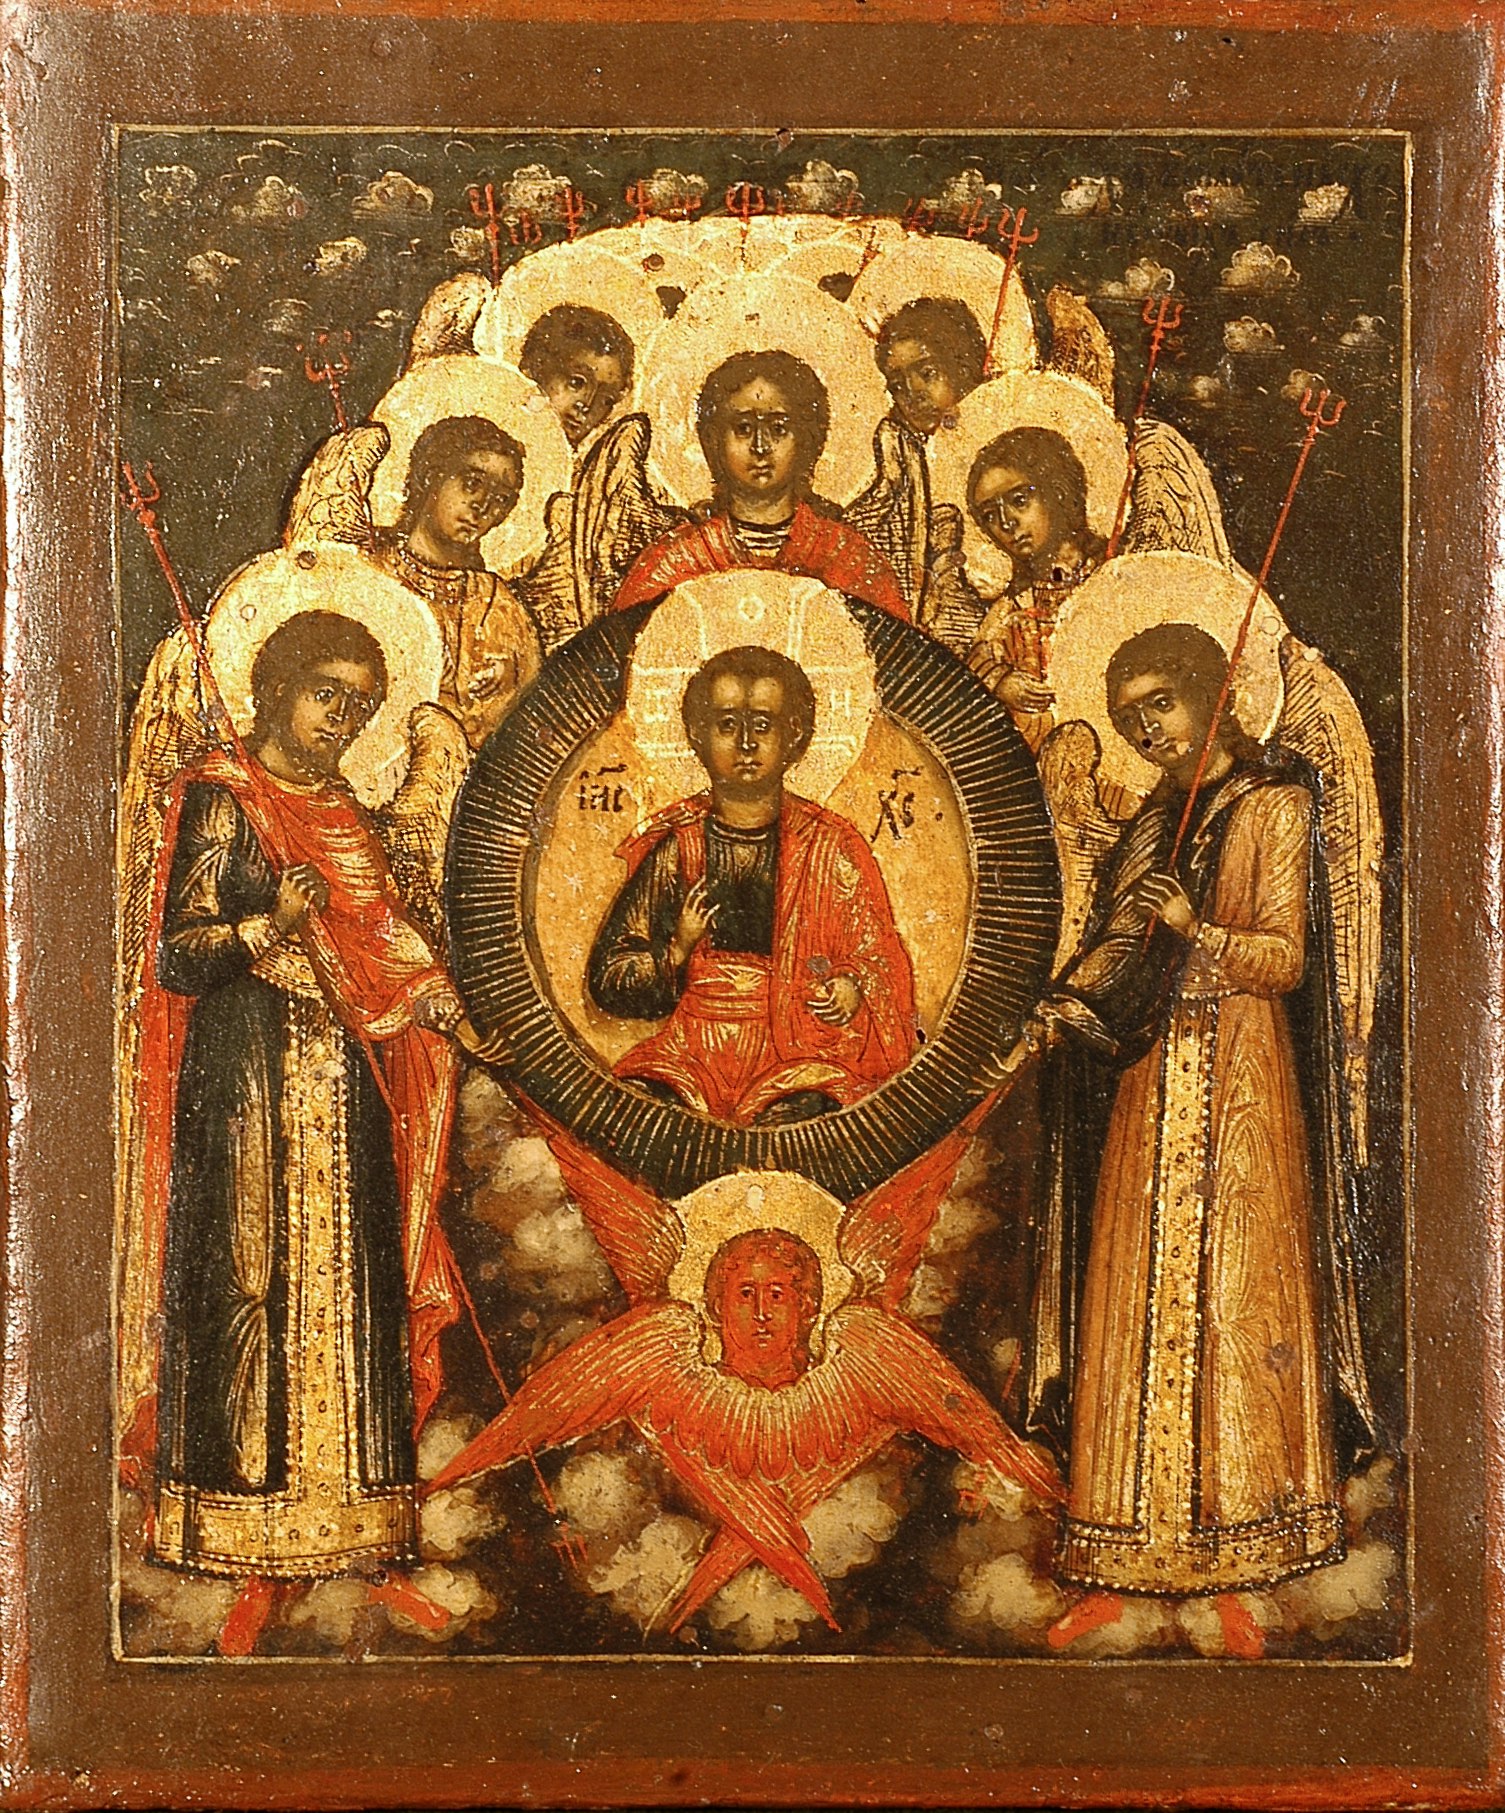 The Synaxis of the Archangels